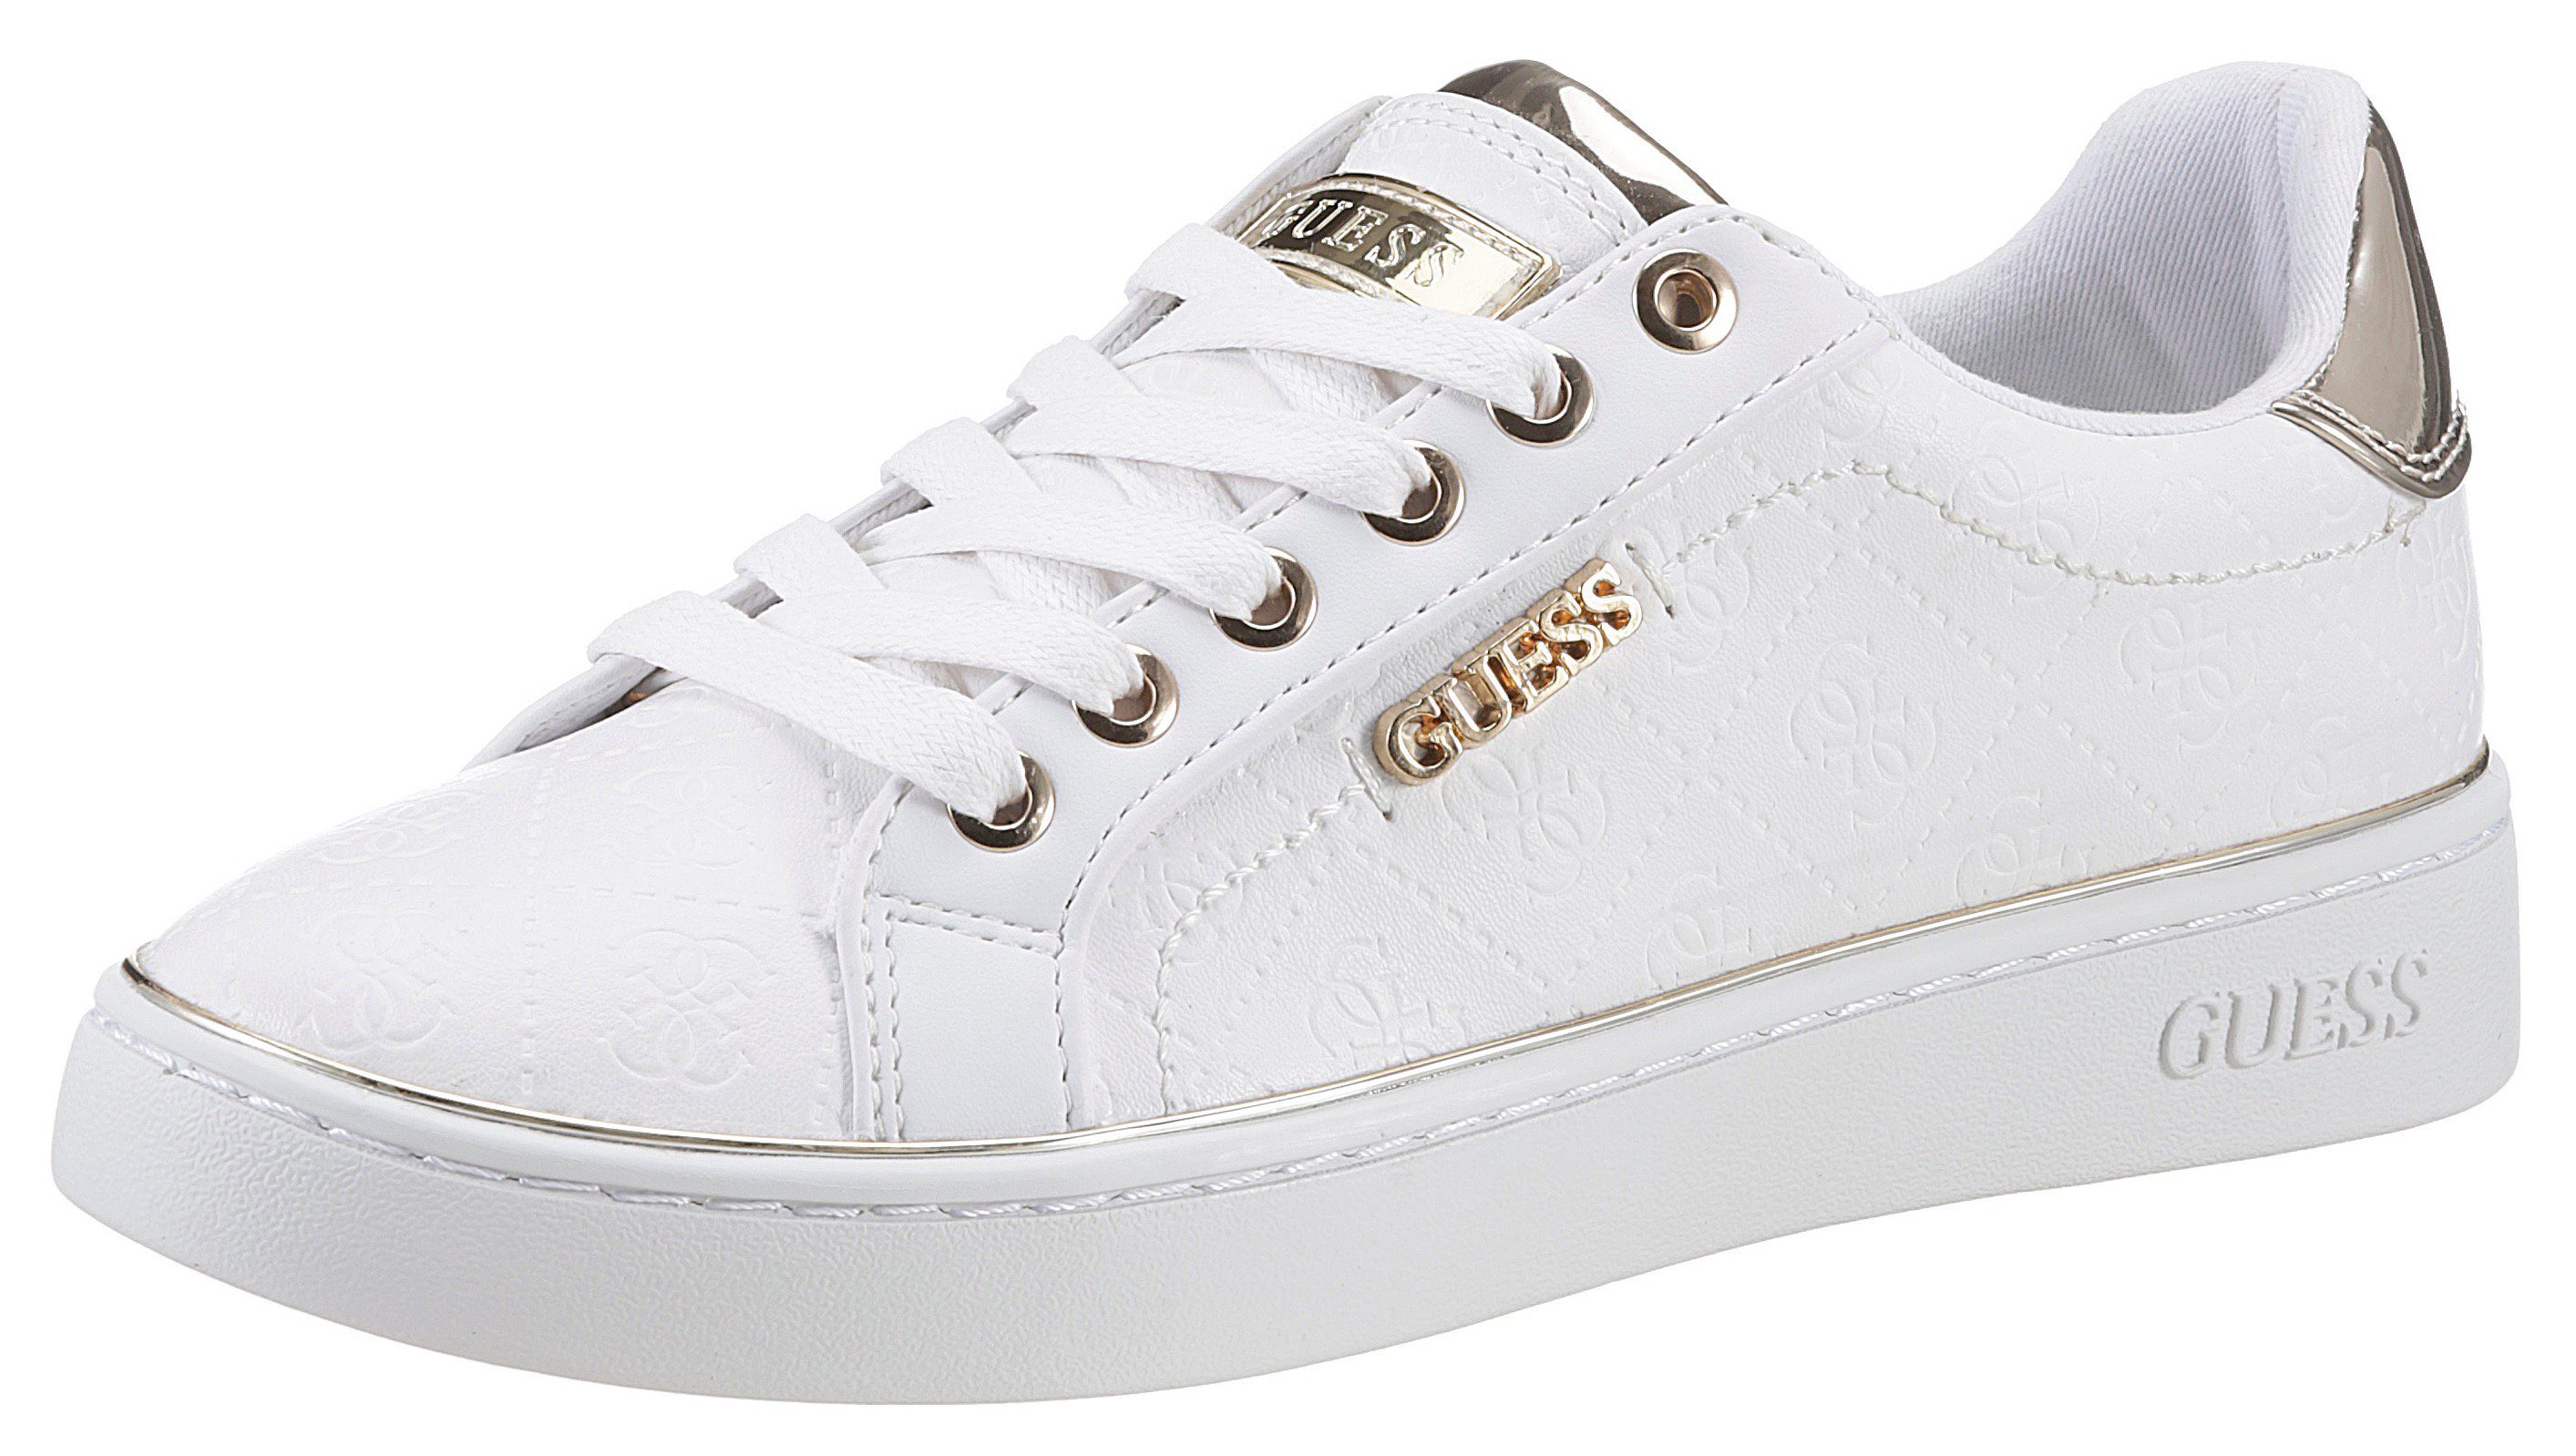 Guess »Beckie Carry Over« Sneaker online kaufen | OTTO